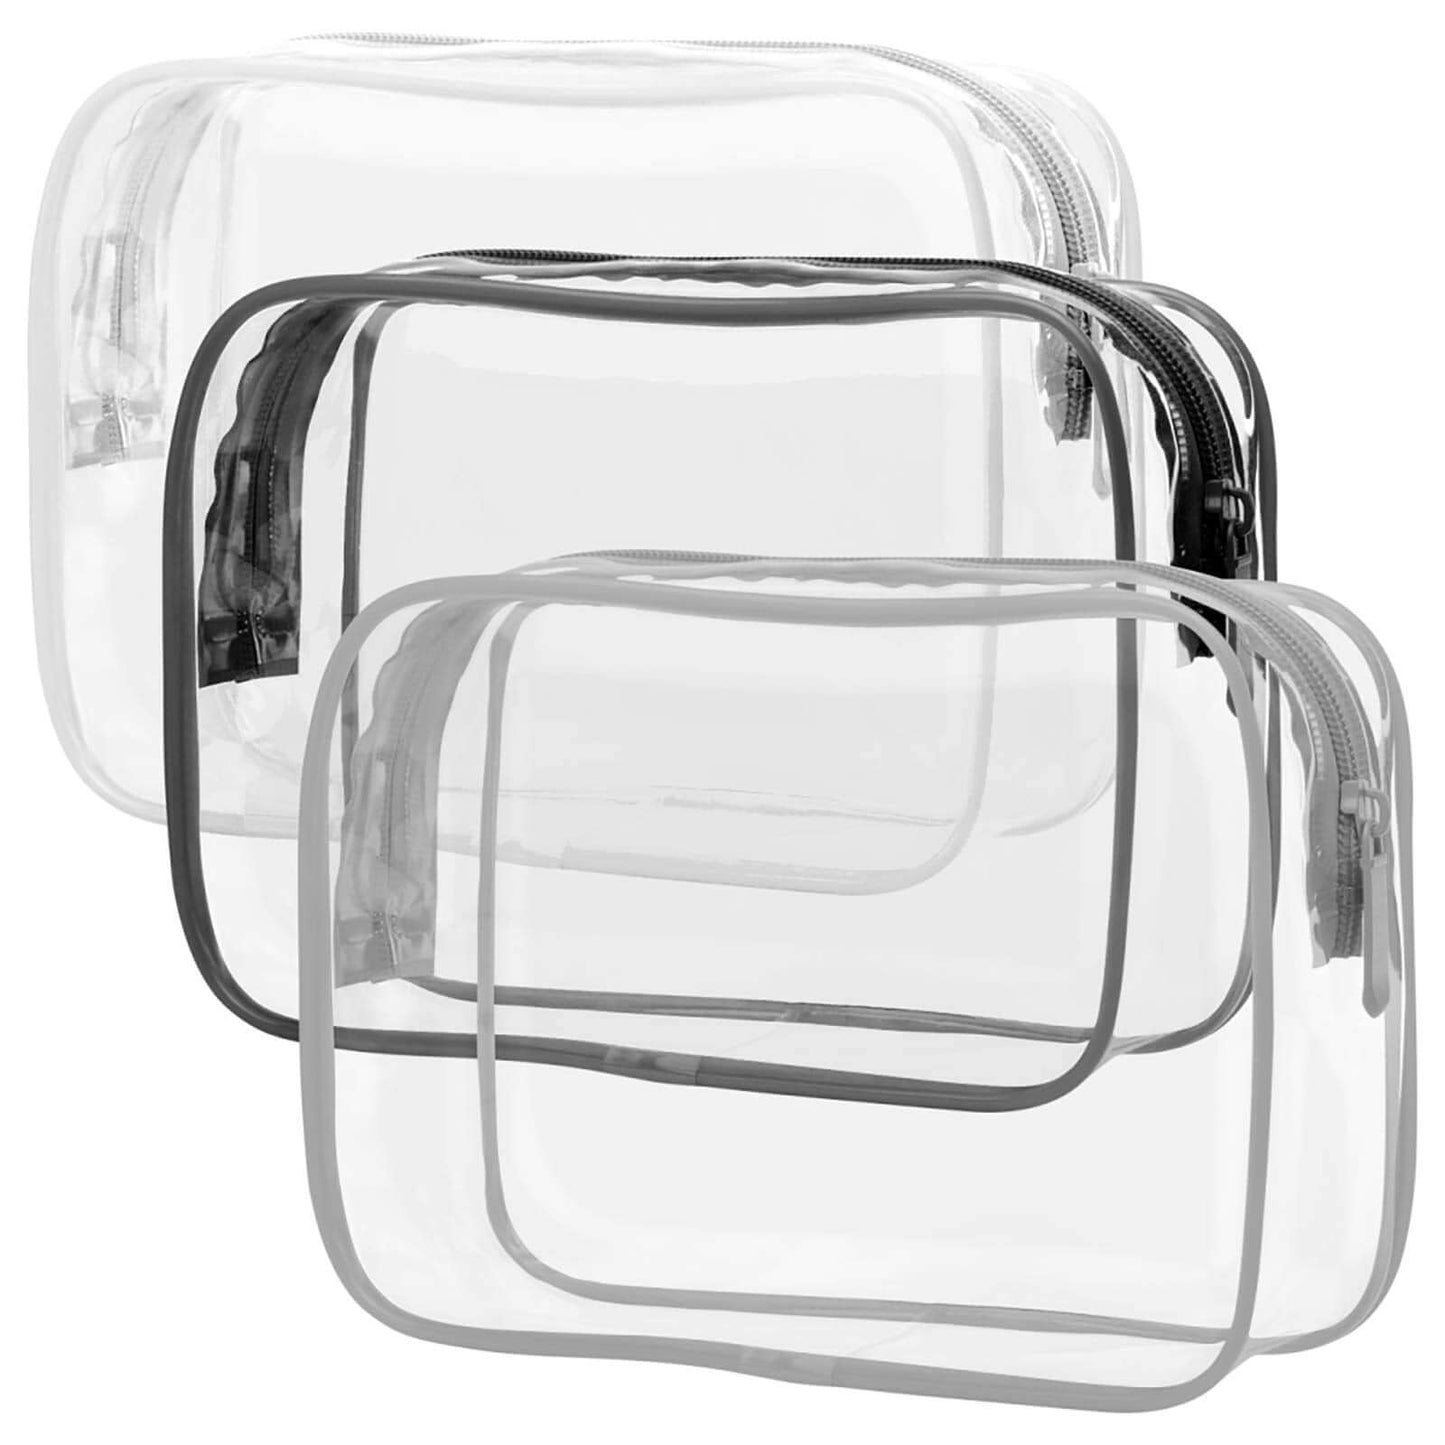 Clear toiletry carry-on bag